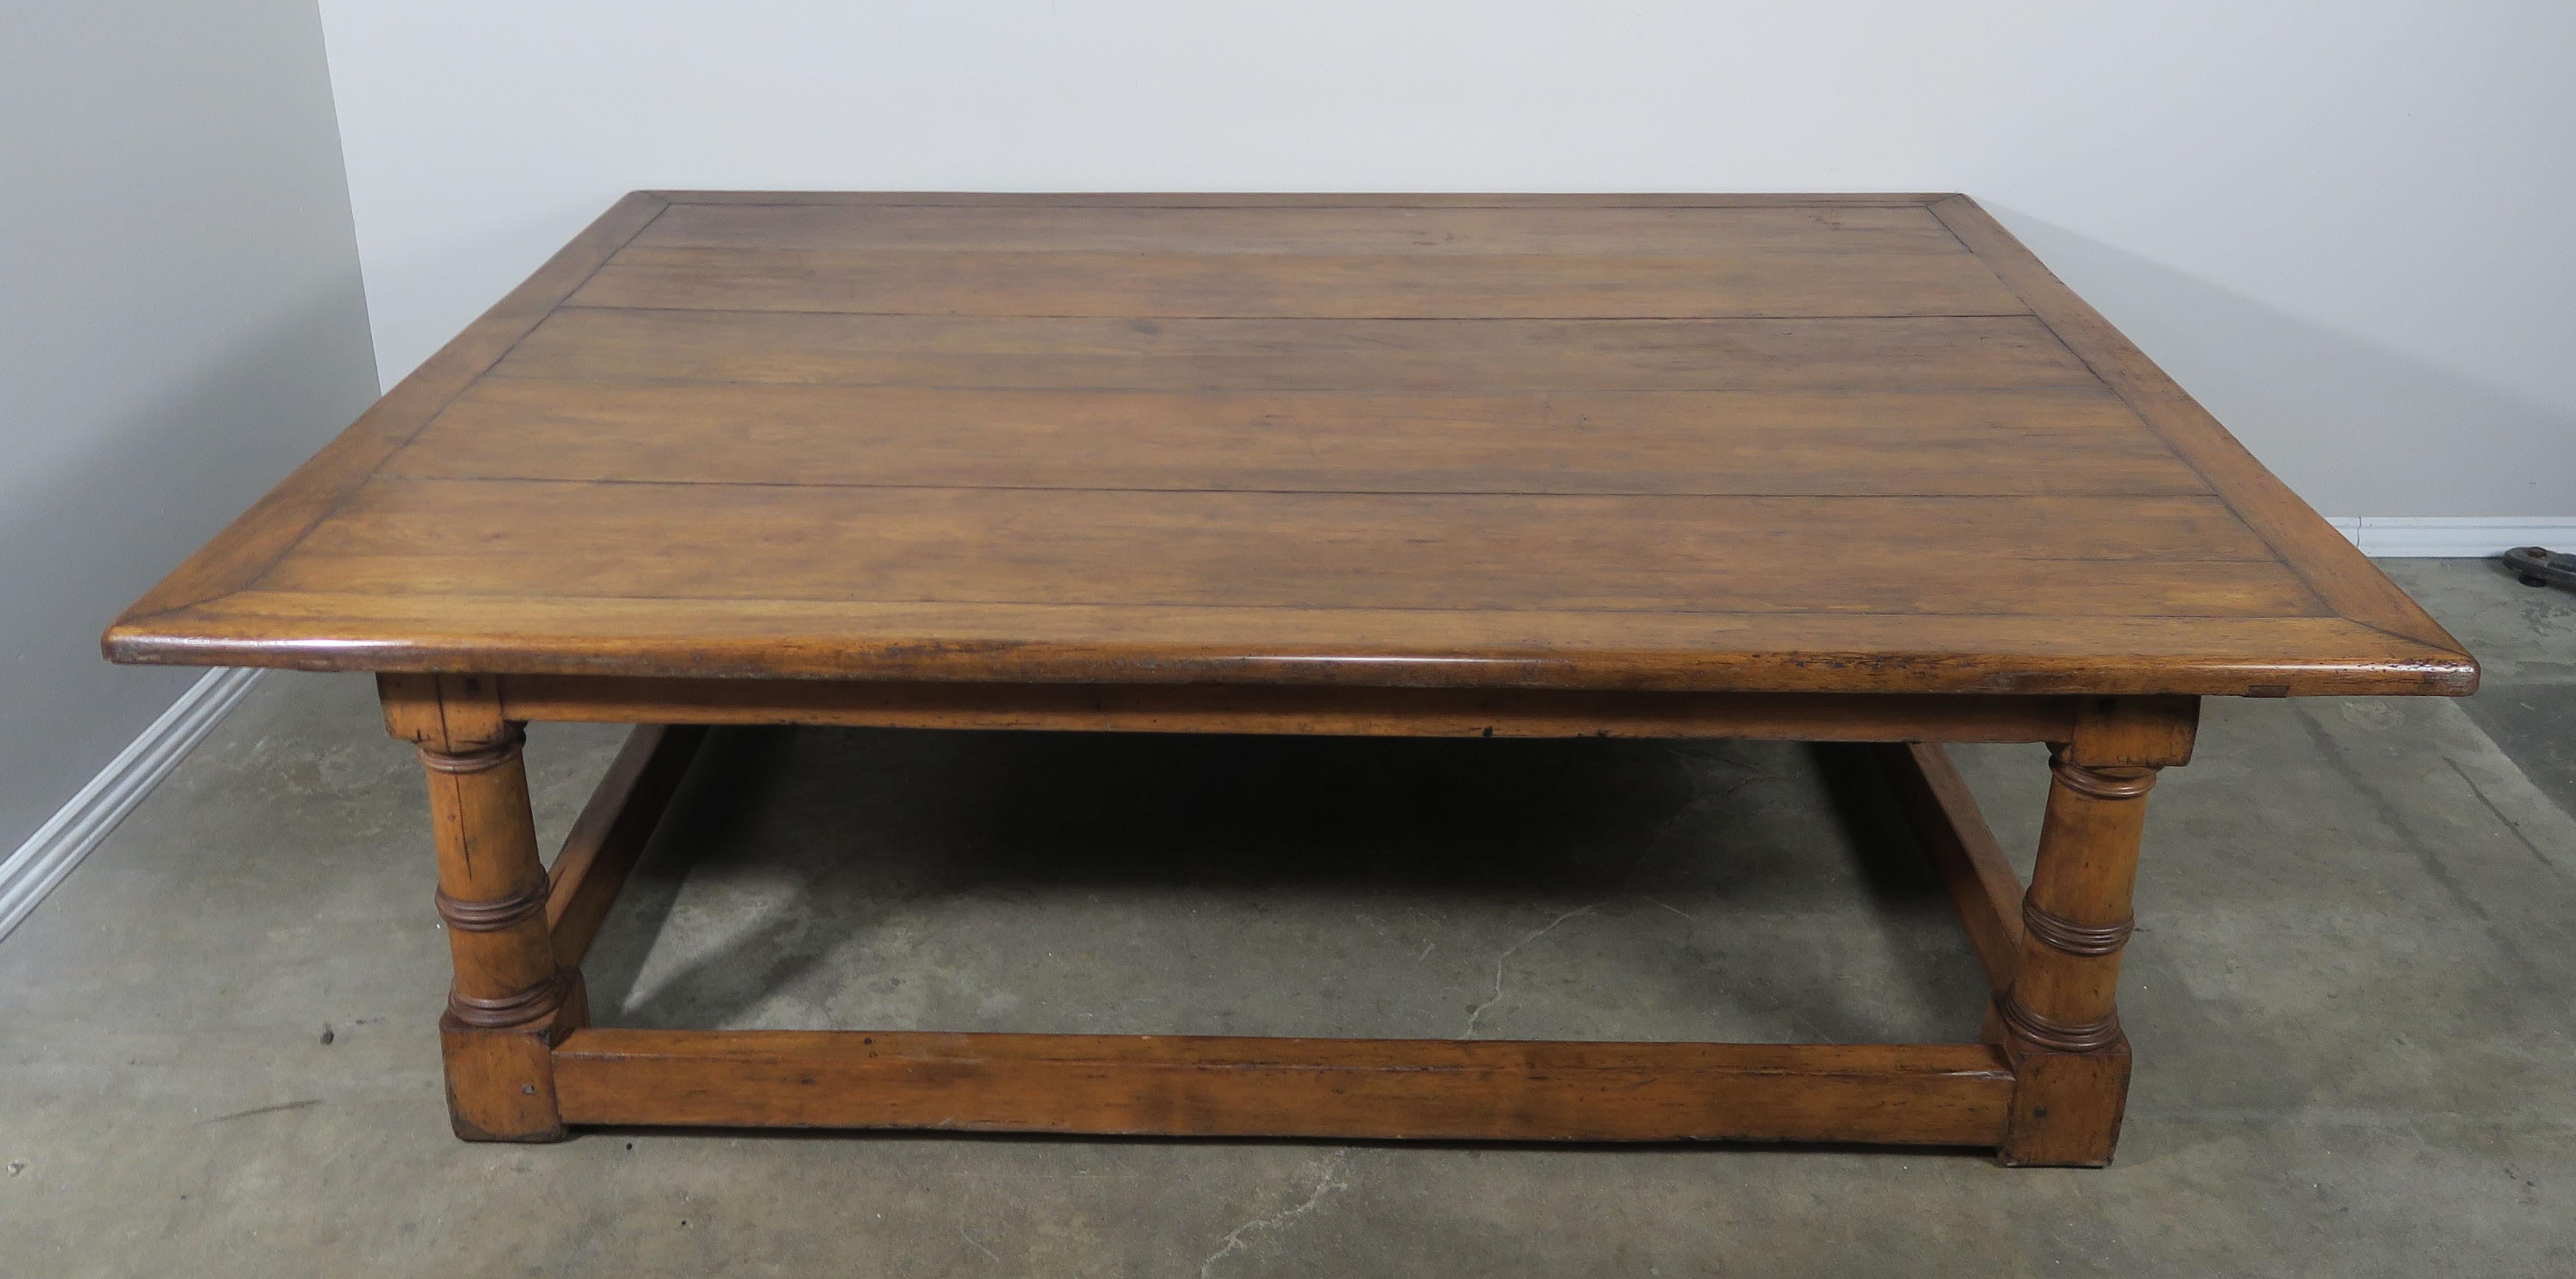 Monumental English rectangular shaped walnut coffee table standing on four column legs connected by a bottom stretcher. Beautiful patina from years of use.